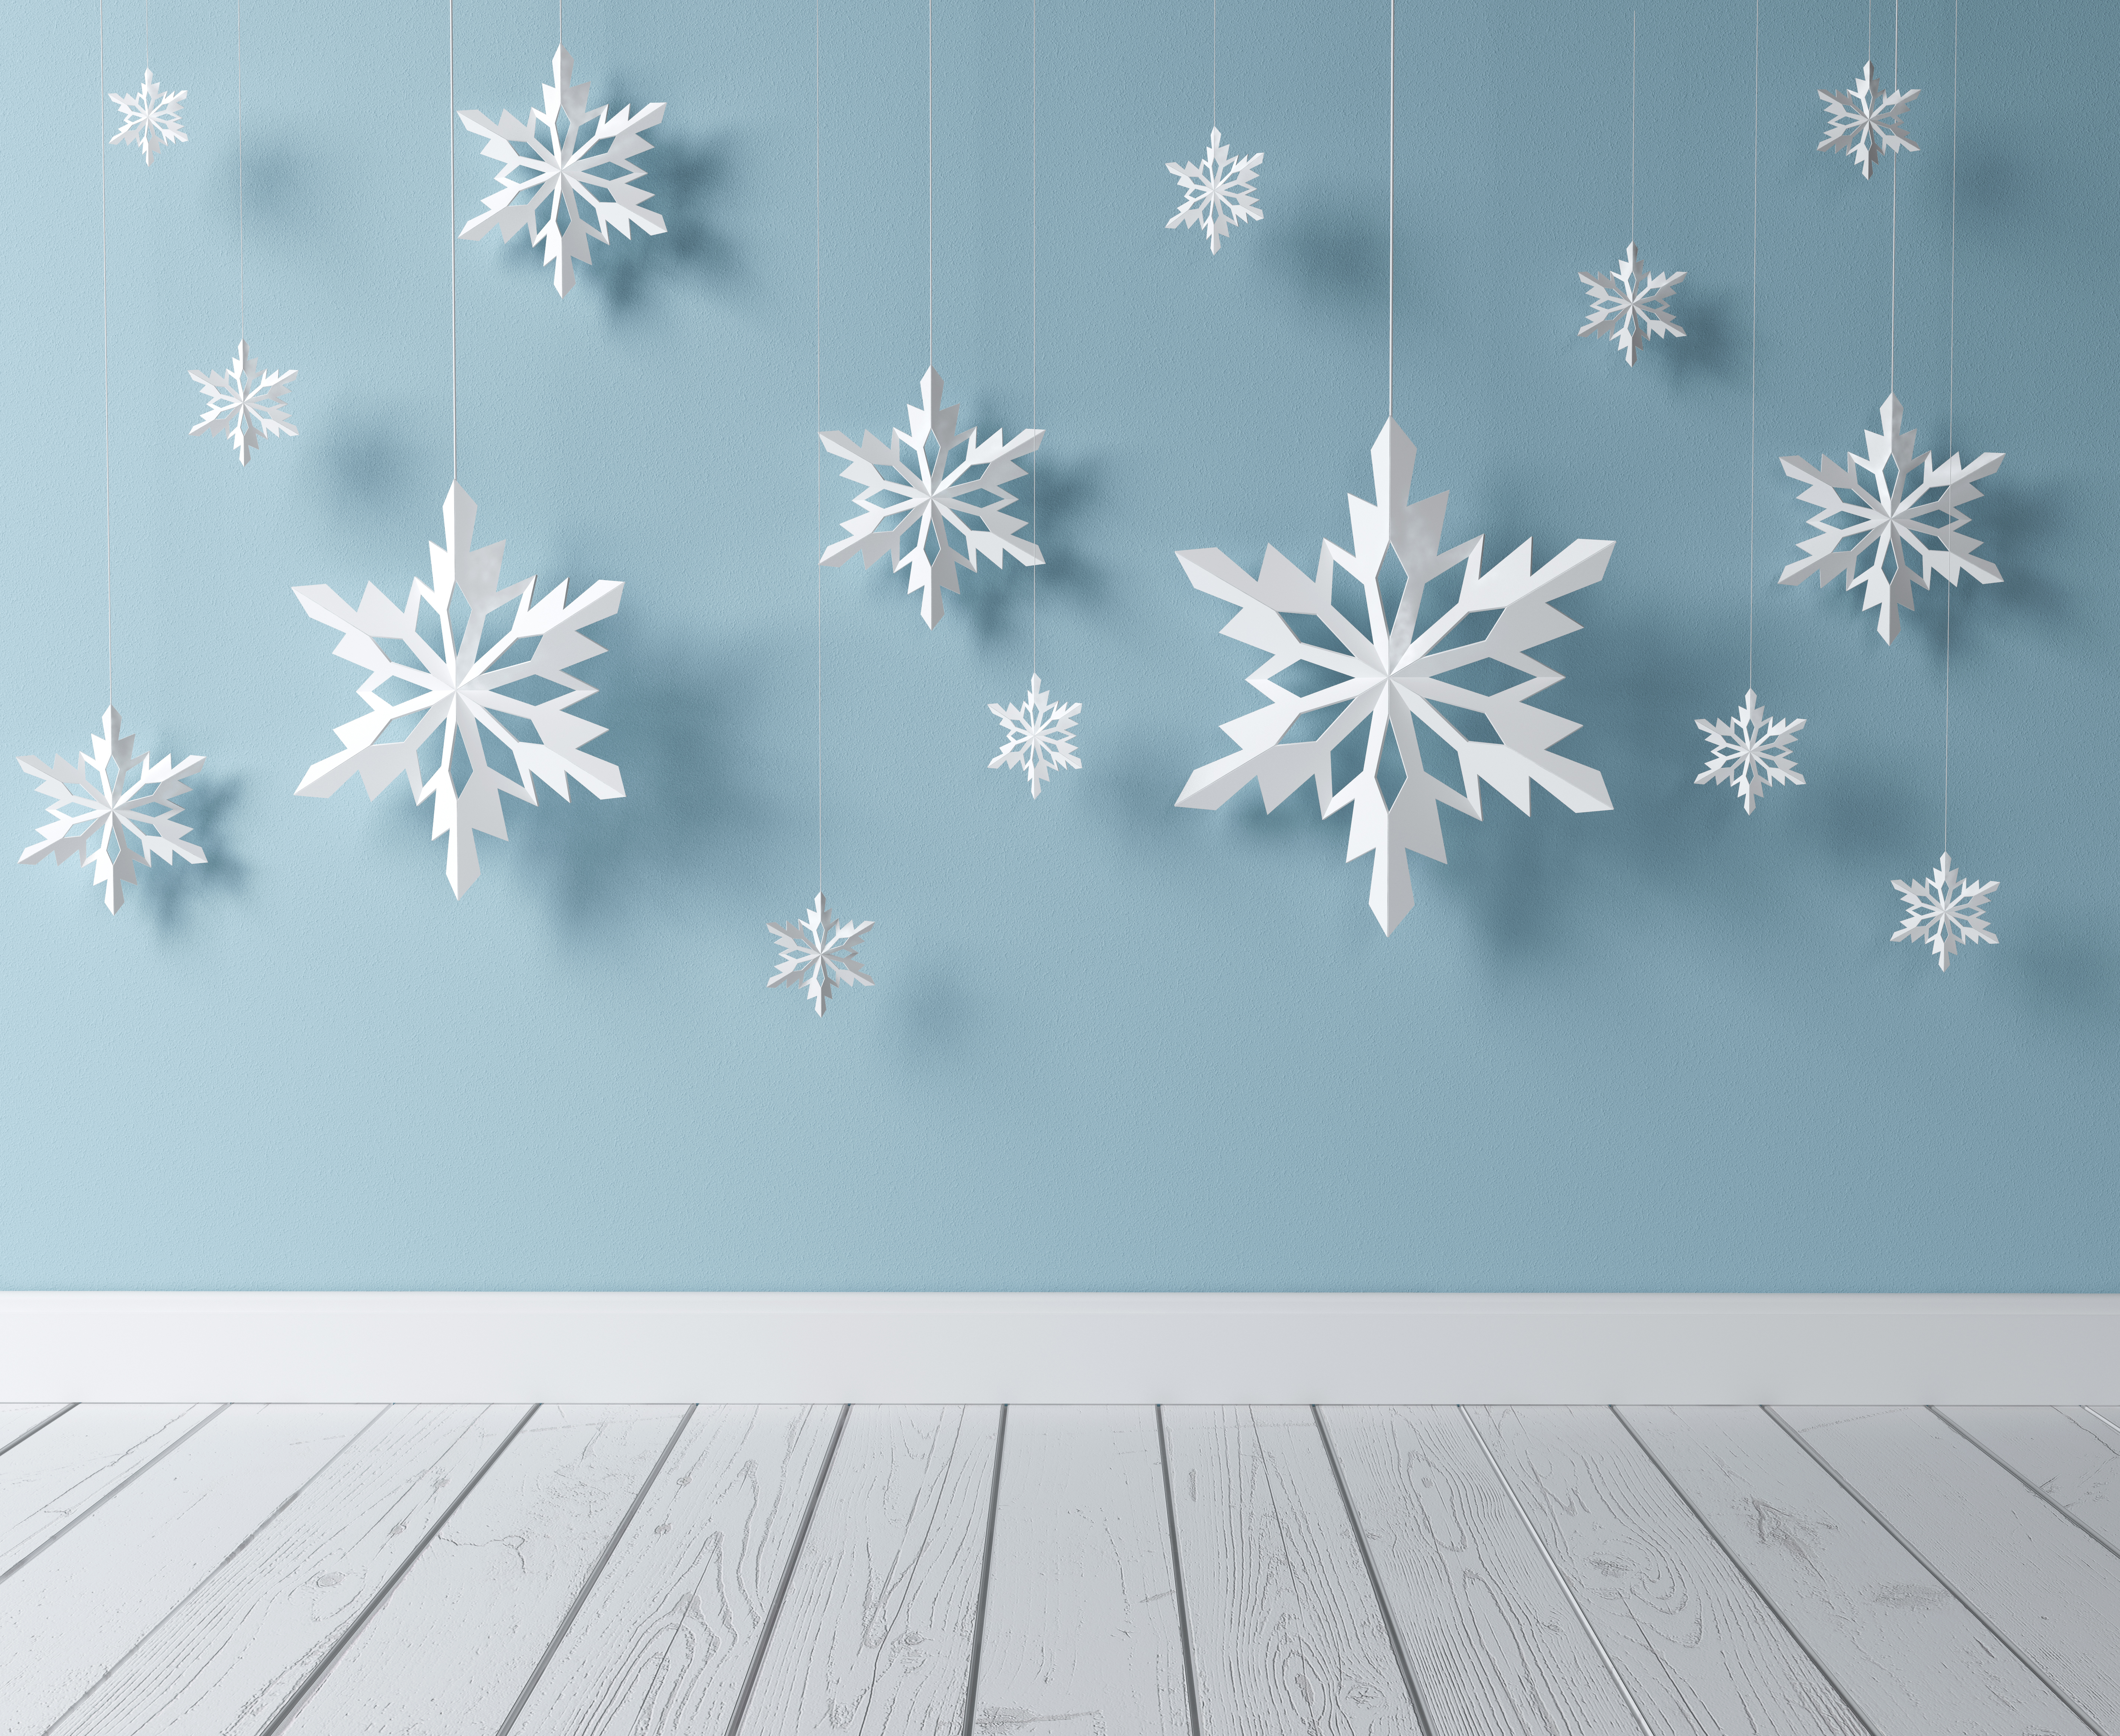 Homemade paper snowflakes against blue backdrop